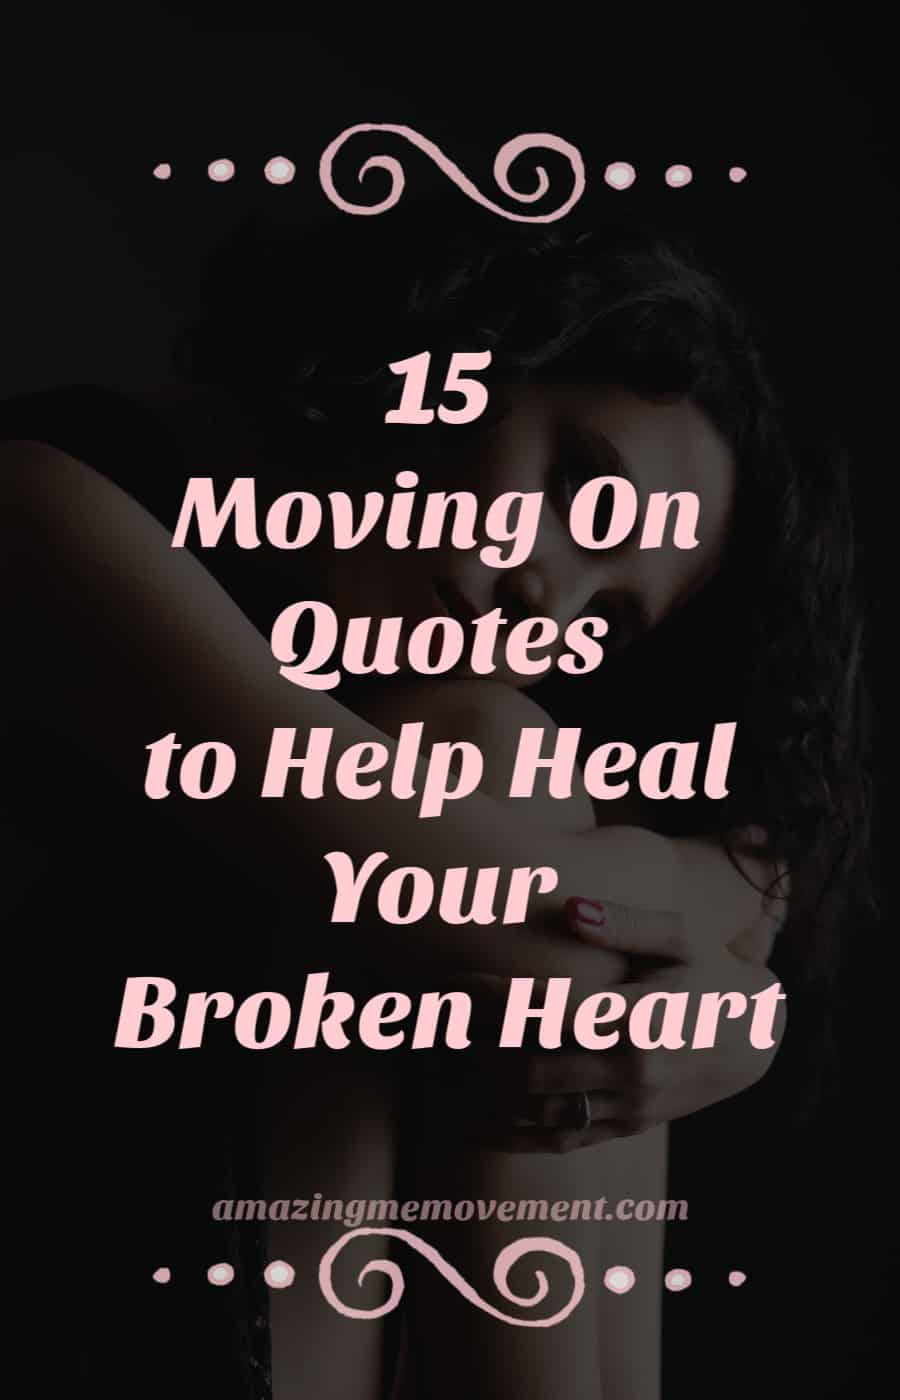 15 Moving On Quotes To Help You Heal Your Broken Heart